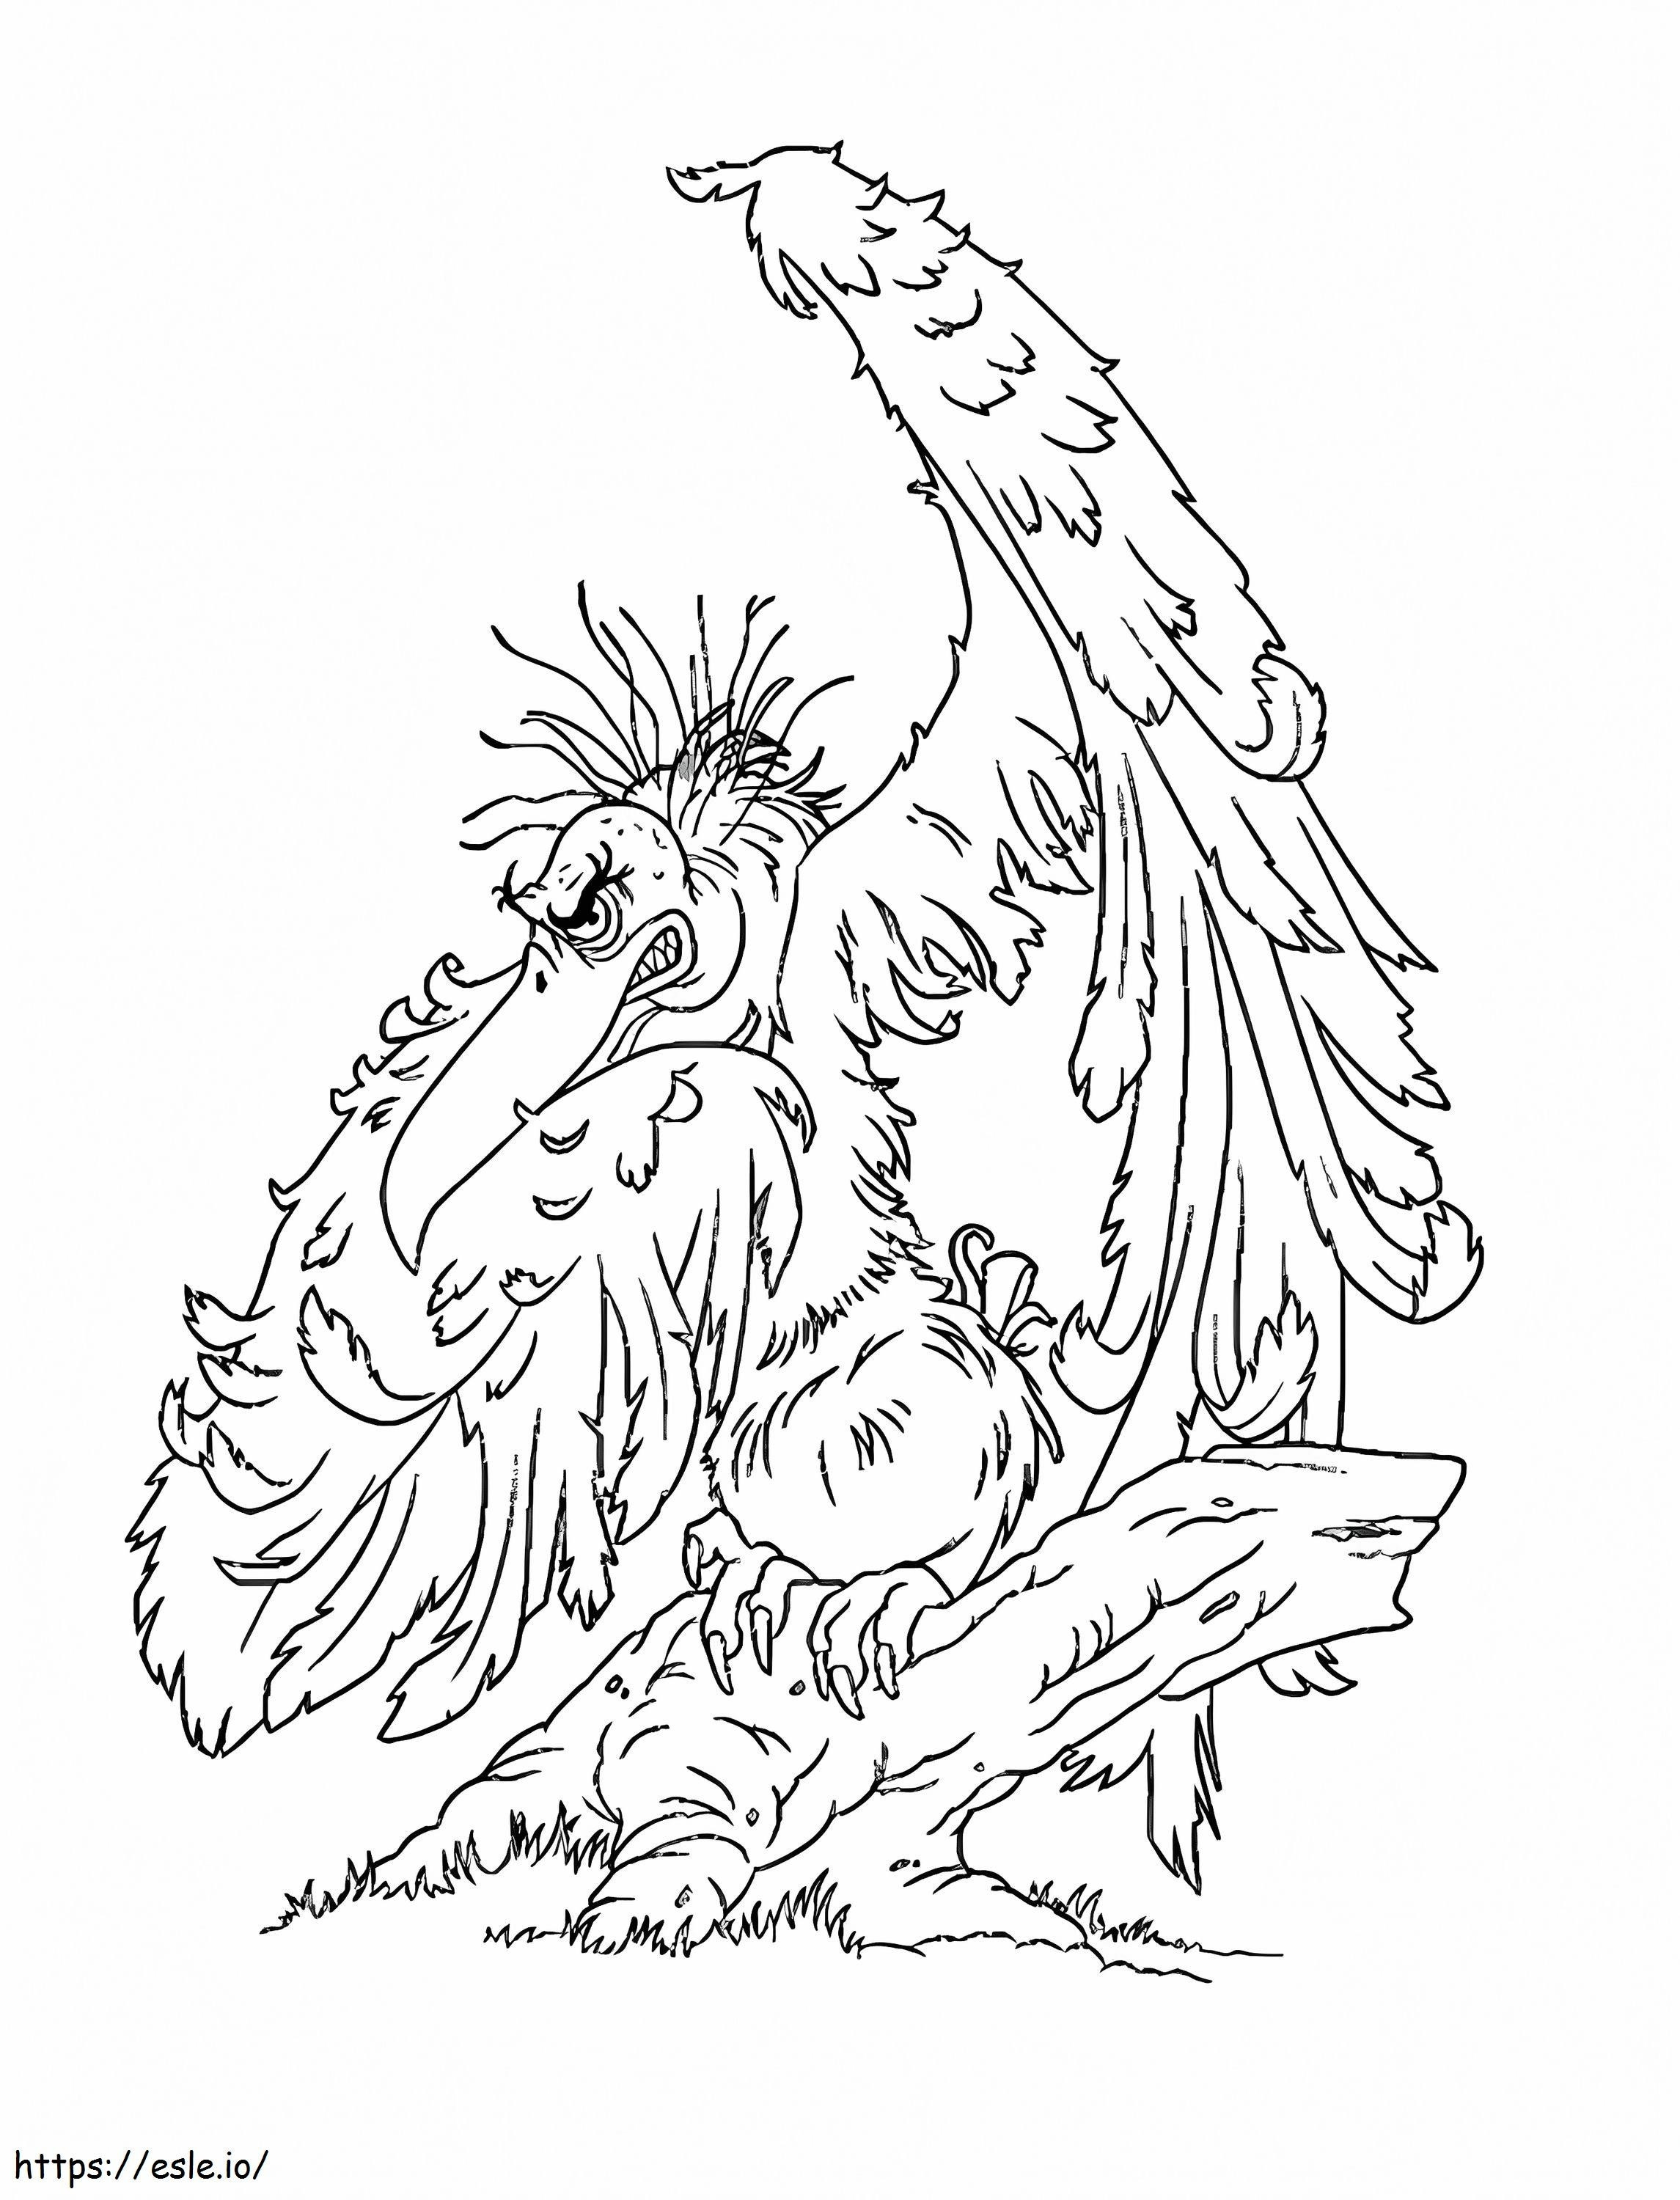 1580720165 32Bae101C698Fc7617D14682A7F94700 coloring page